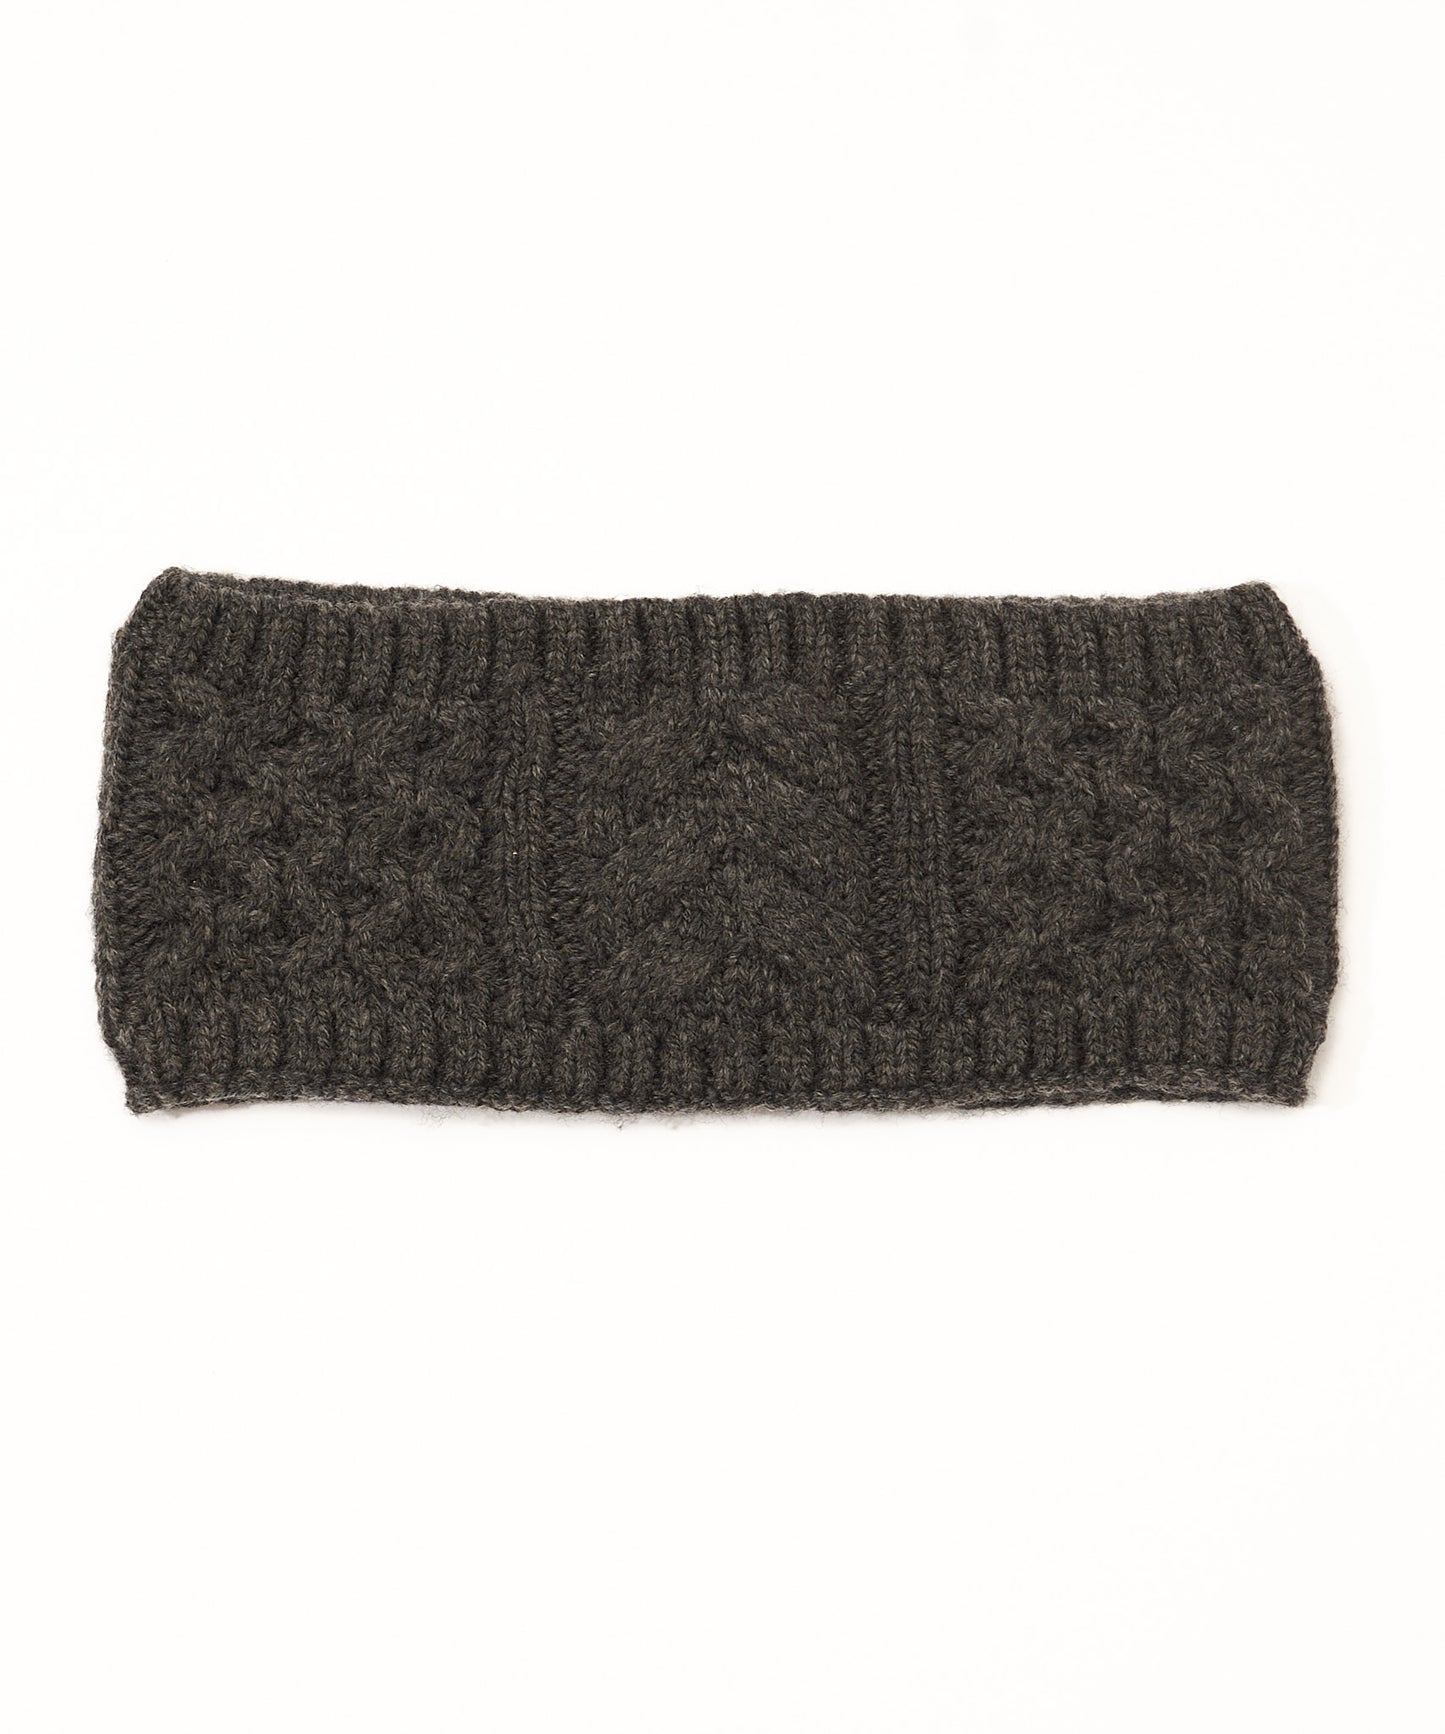 Recycled Wishbone Cable Headband in color Charcoal